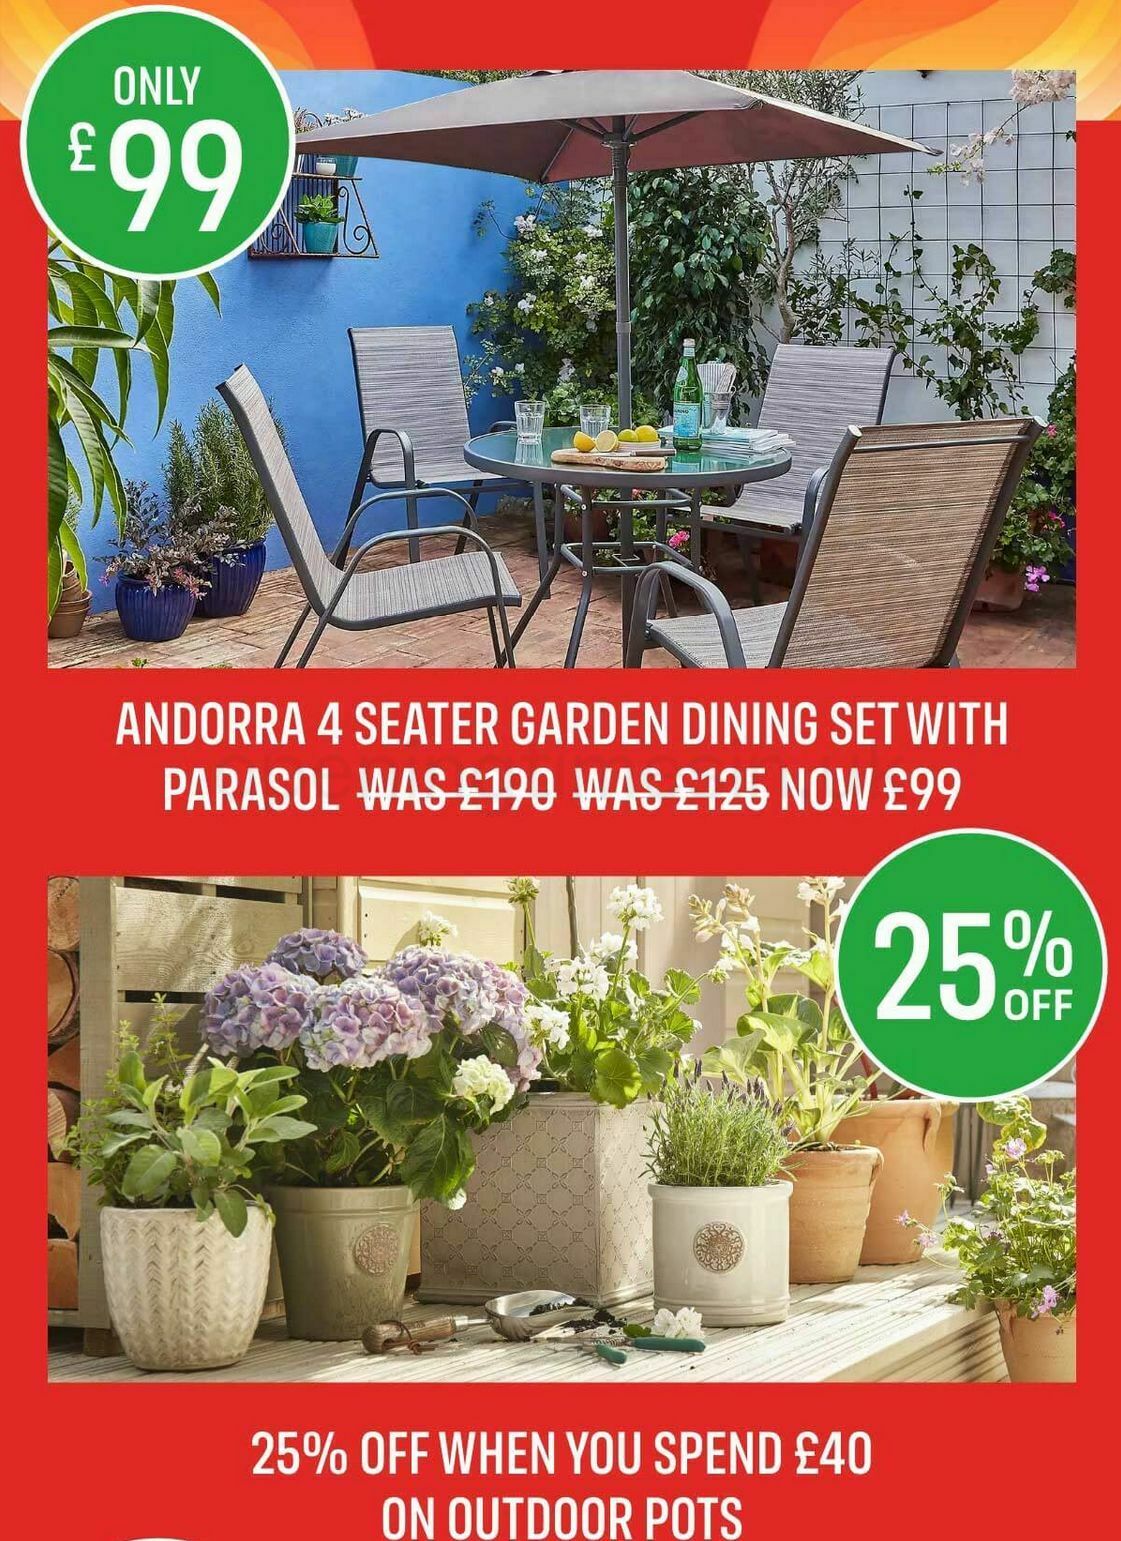 Homebase Offers from 5 August